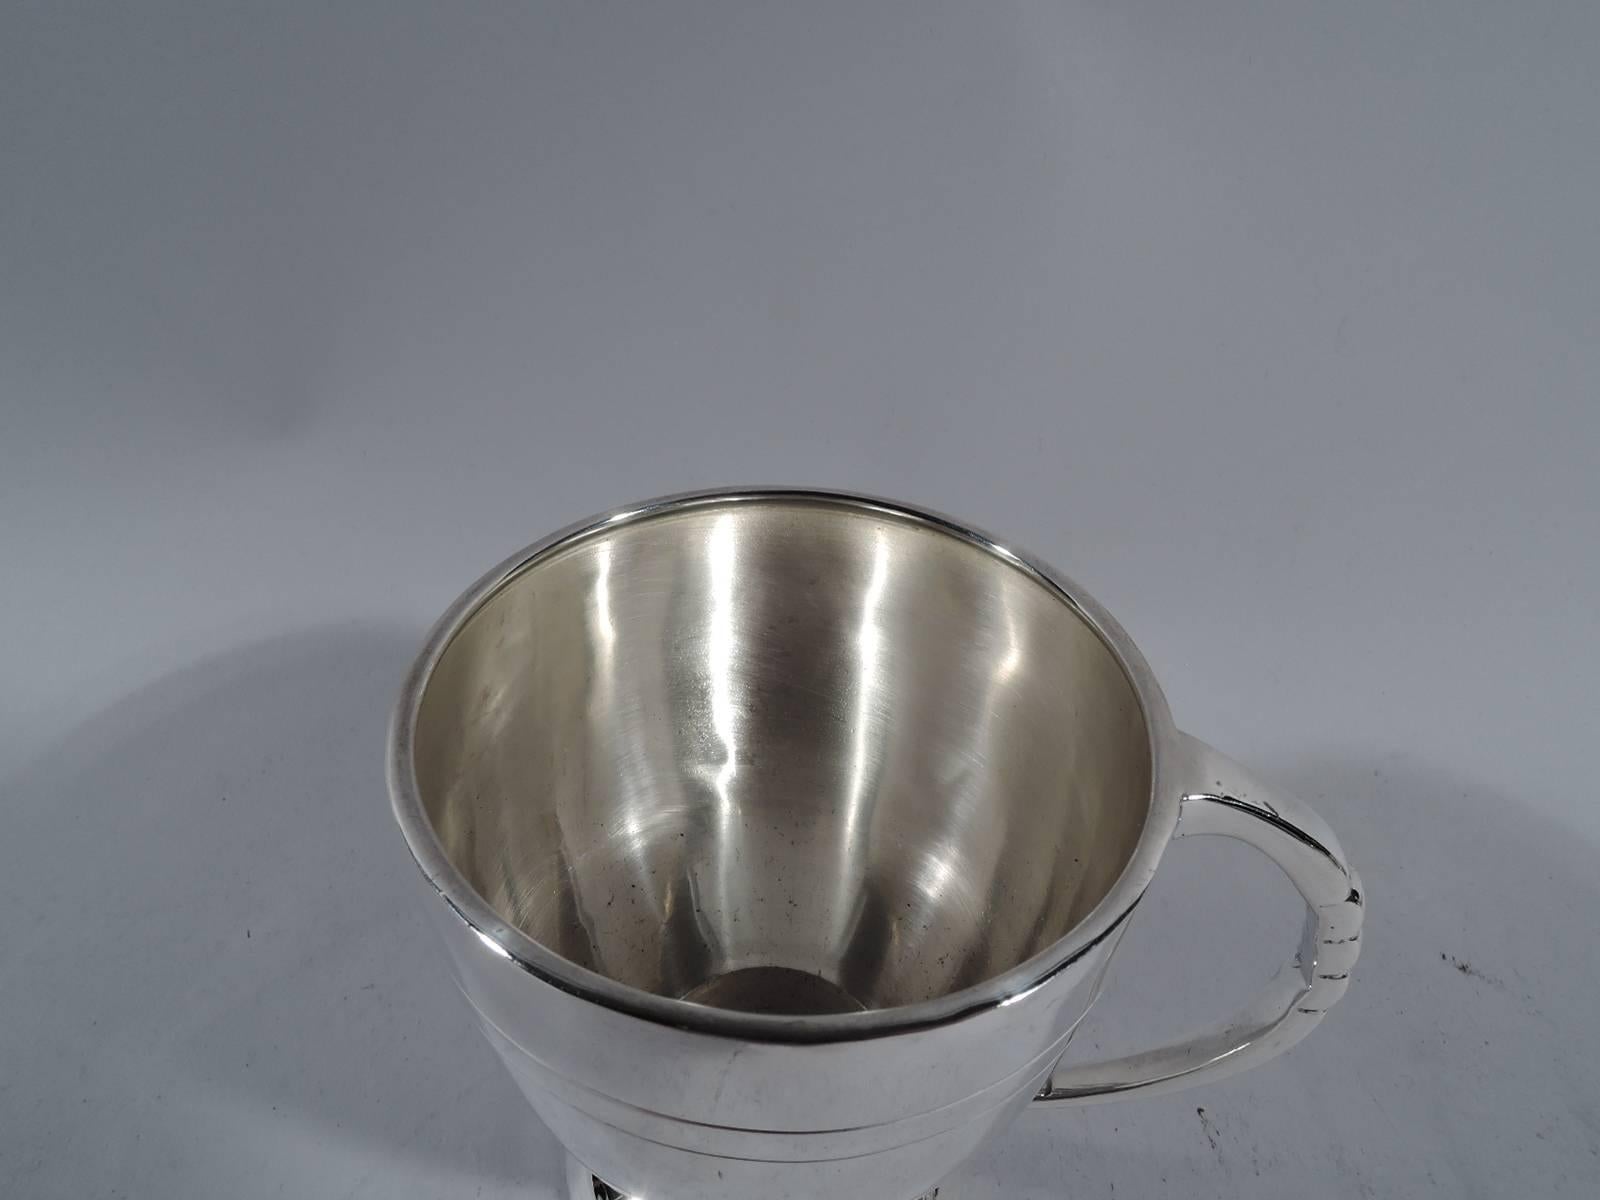 Elizabeth II sterling silver baby cup. Made by John B. Chatterley & Sons in Birmingham in 1960. Curved and tapering bowl on raised foot. Notched C-scroll handle. Incised double bands at top and bottom. Hallmarked. Measure: Weight 3.3 troy ounces.